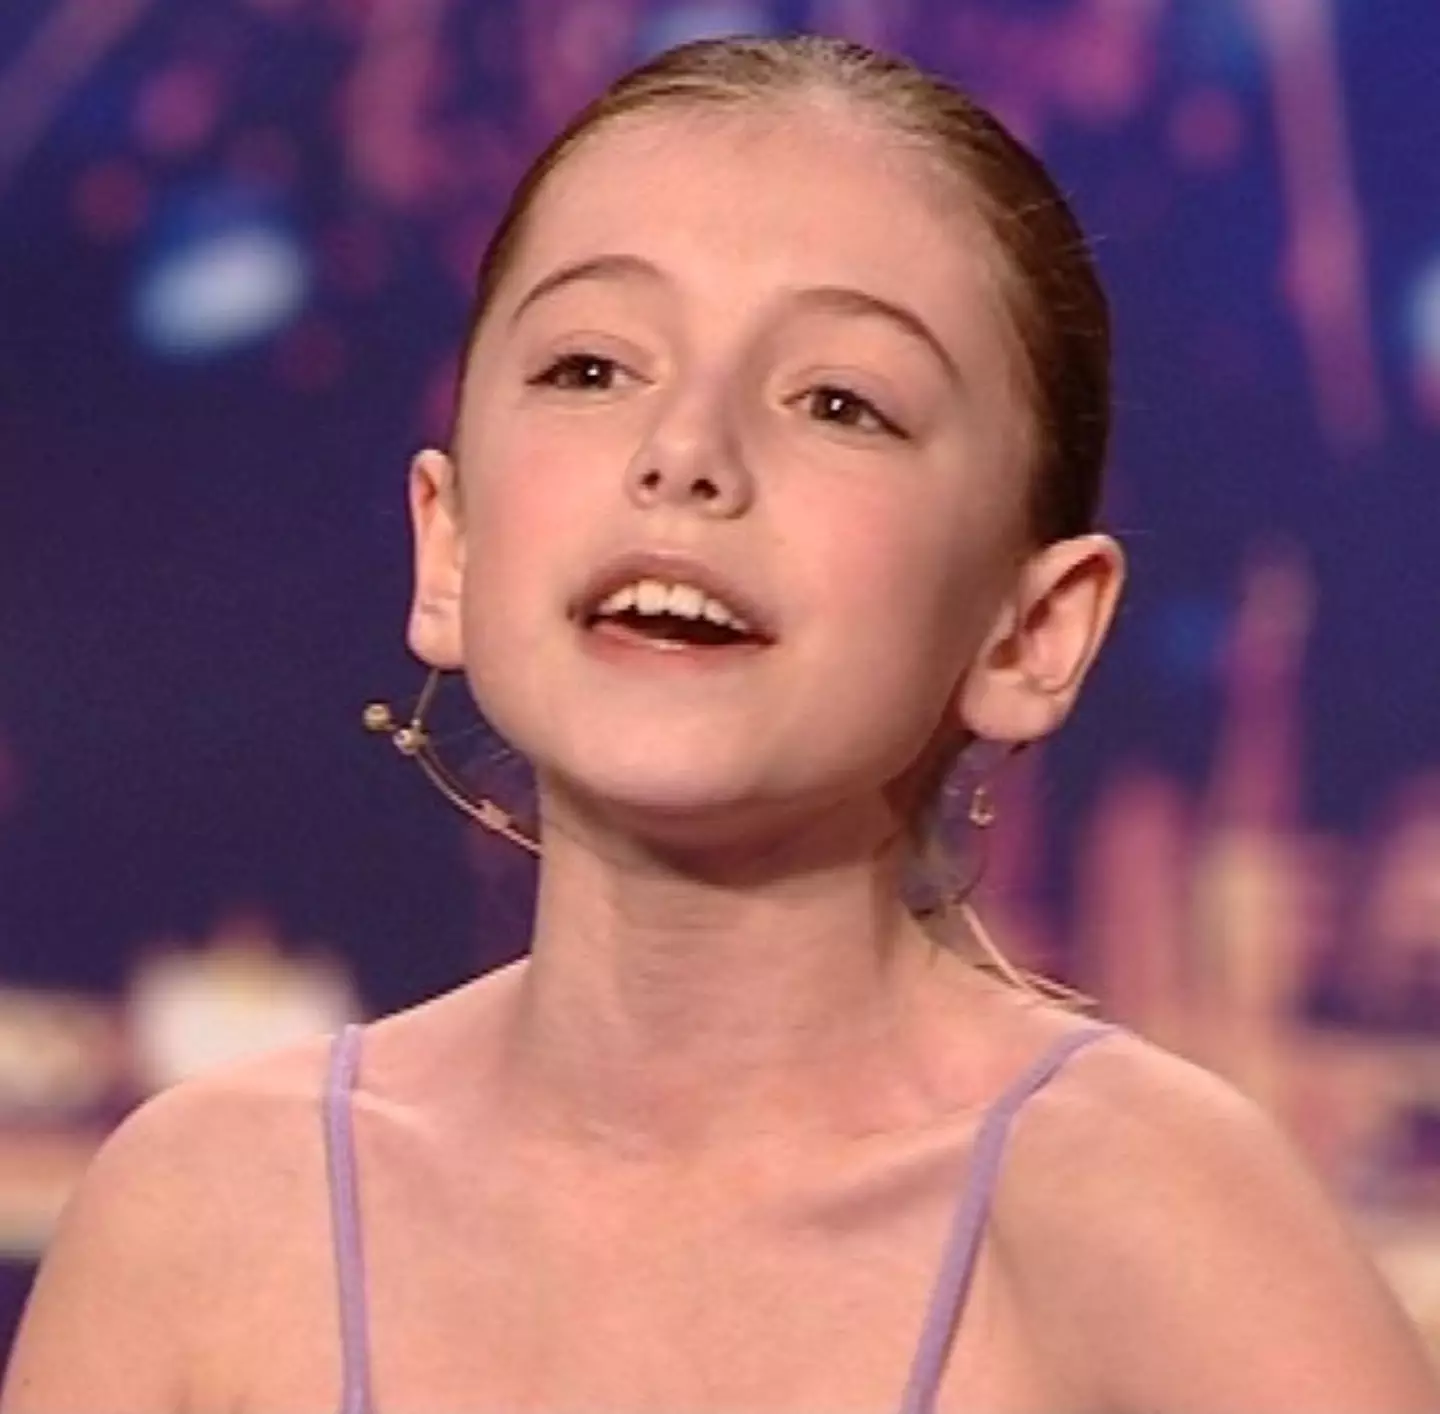 Hollie Steel suffered a panic attack on Britain's Got Talent.